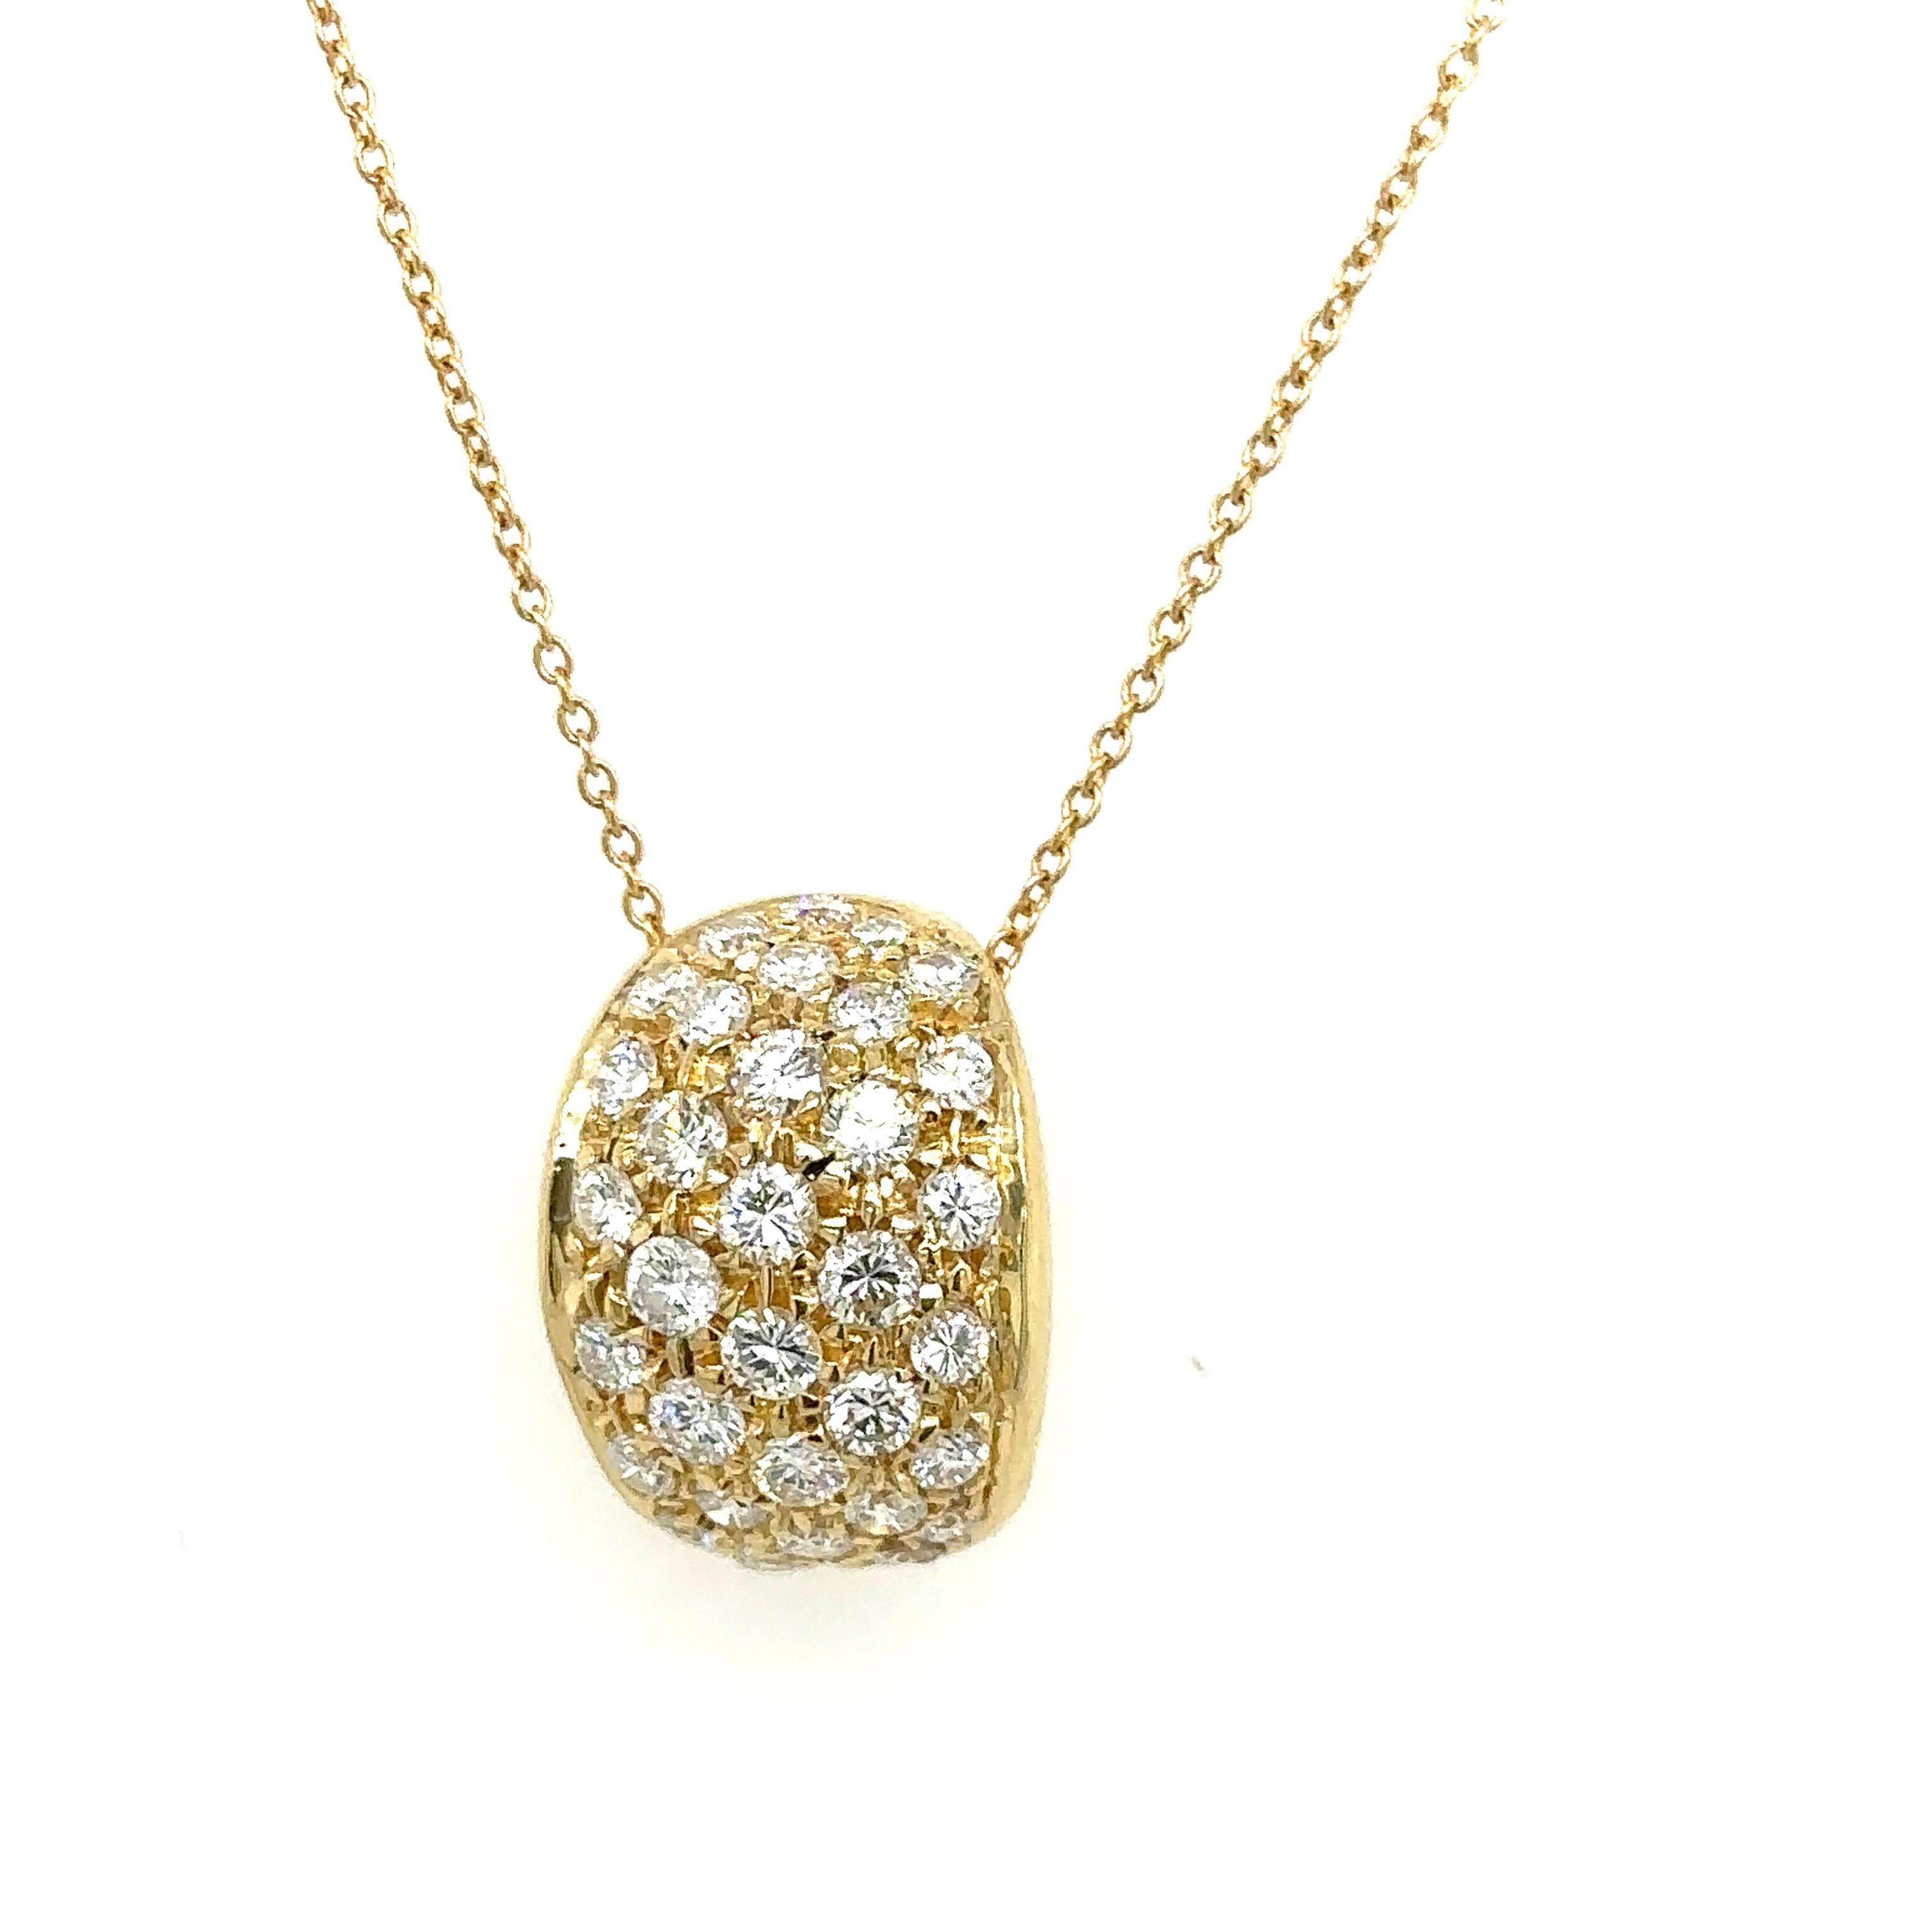 This pendant set features 34 natural round brilliant cut Diamonds with a total weight of 1.0ct. The pendant is suspended from an 18 inches 18ct Yellow Gold chain with adjustable at 16